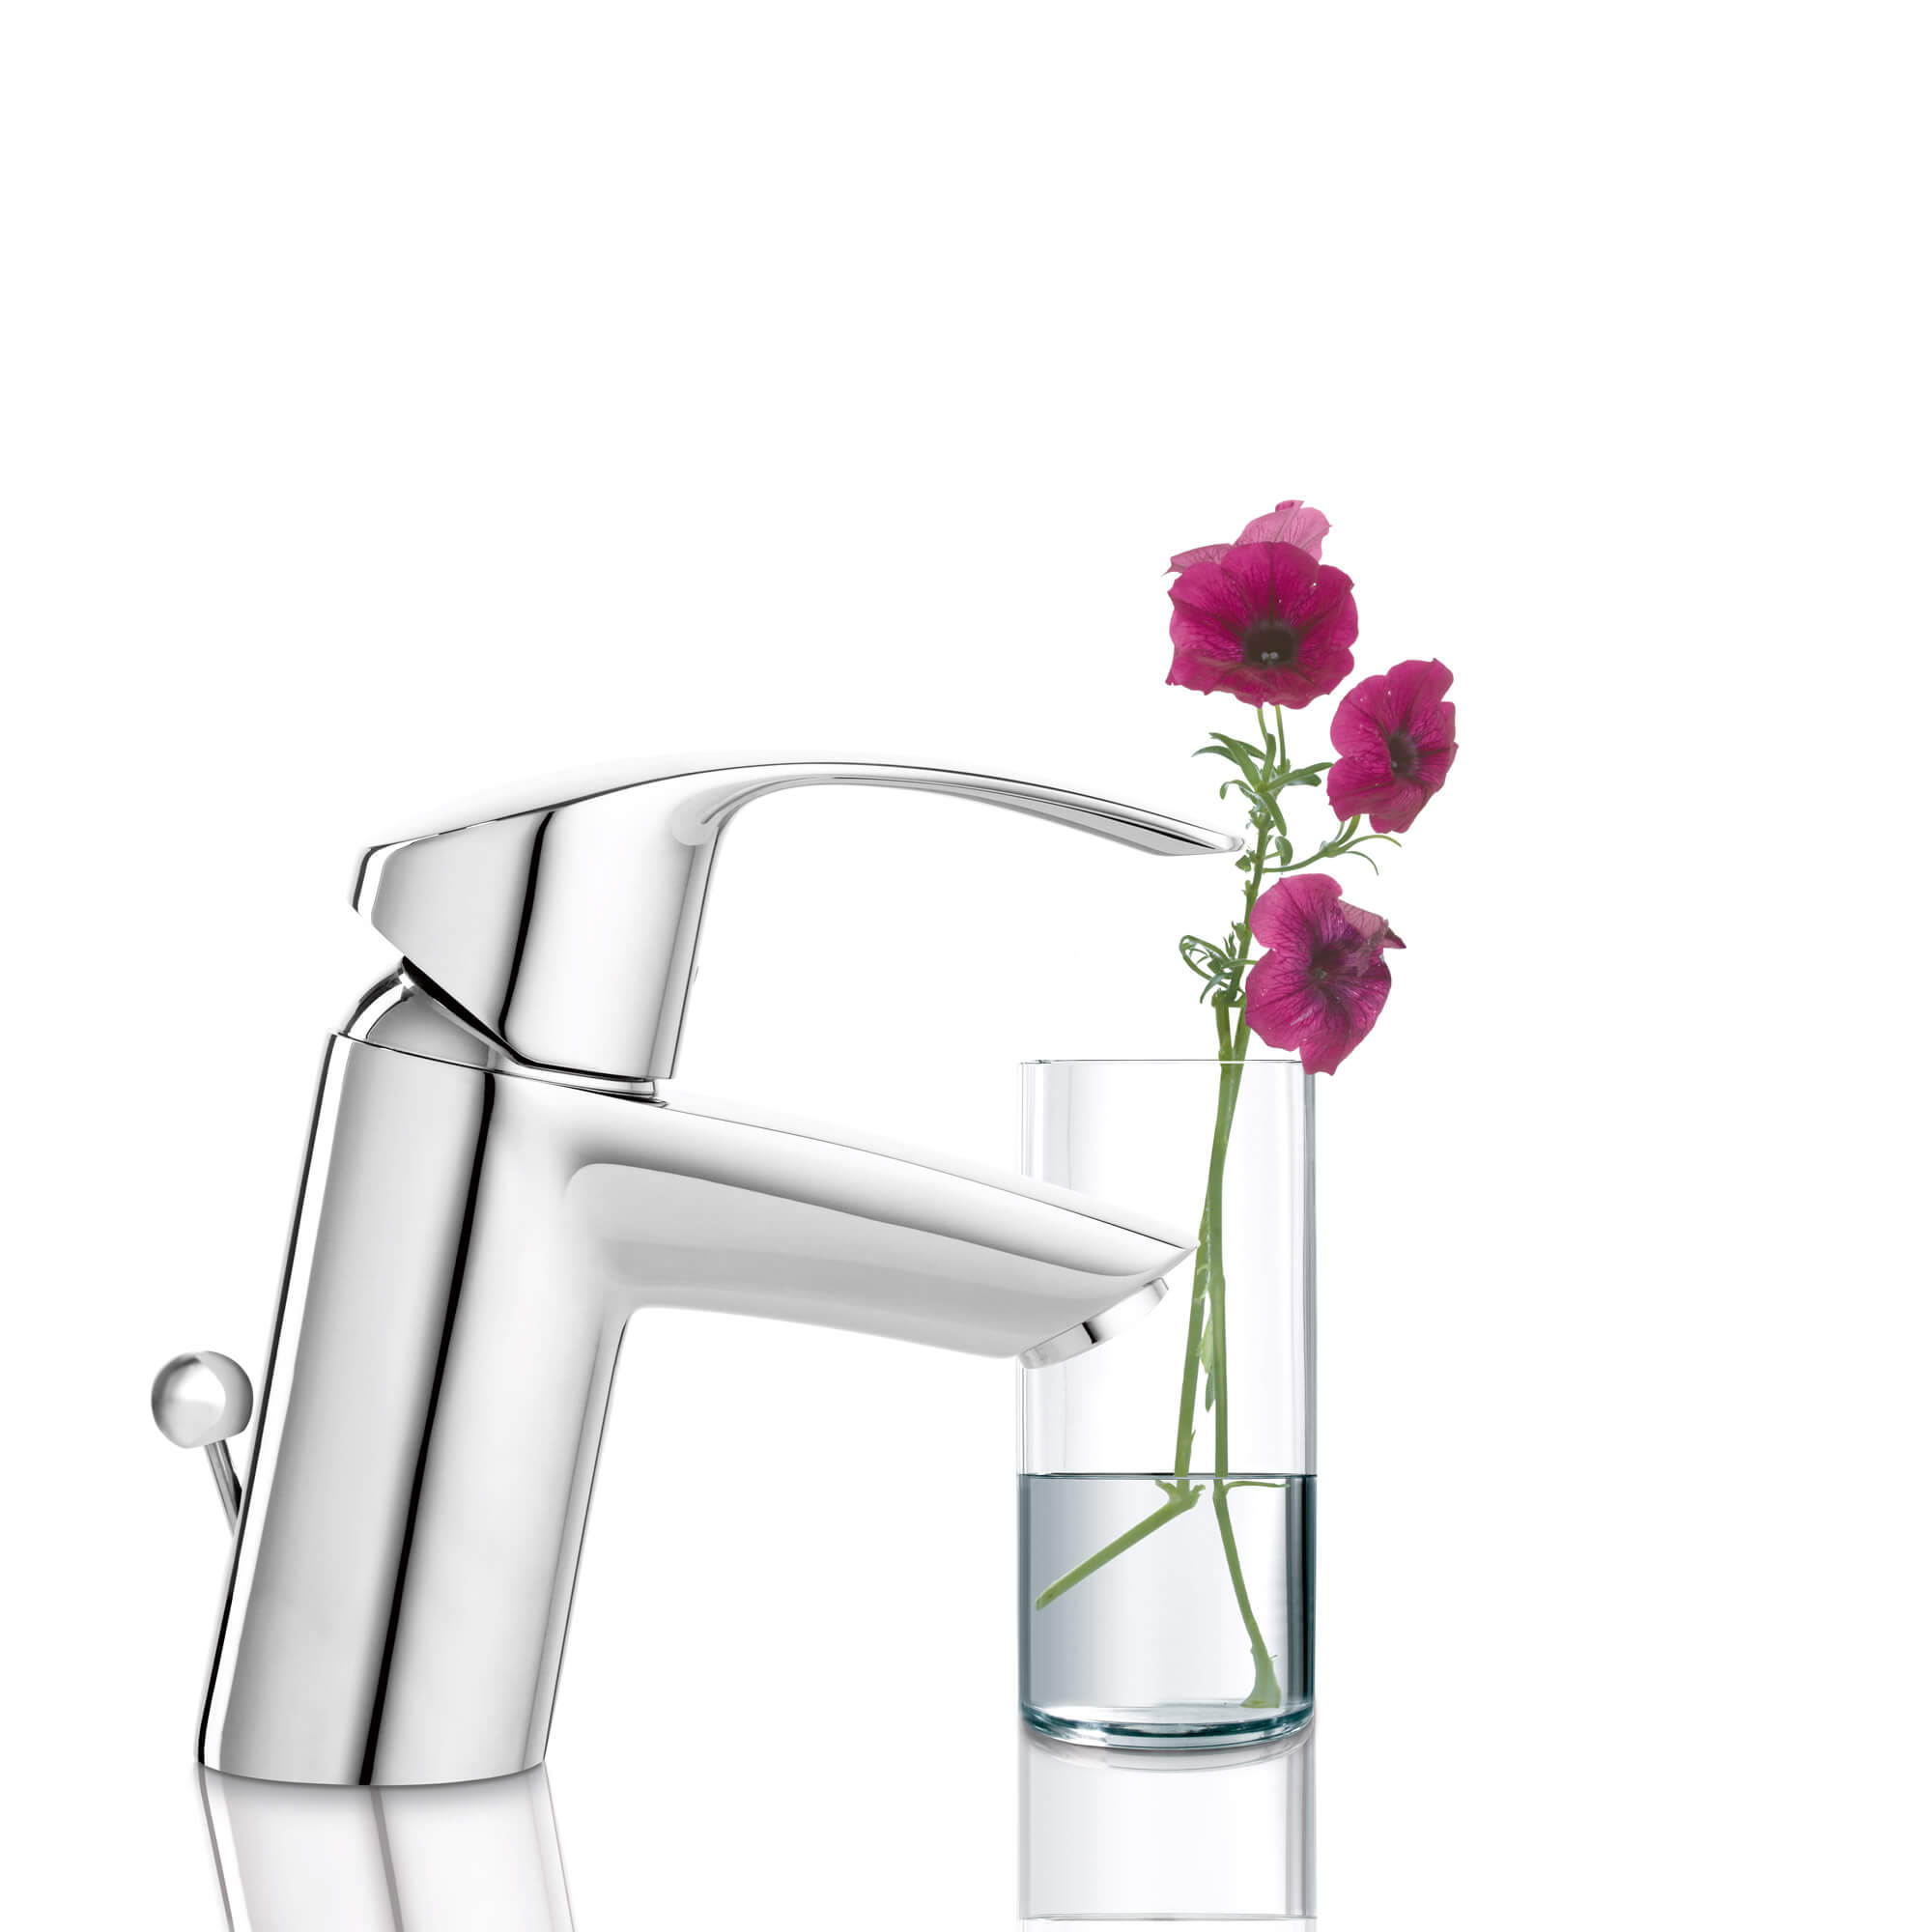 Eurosmart faucet pictured next to a glass filled with flowers.